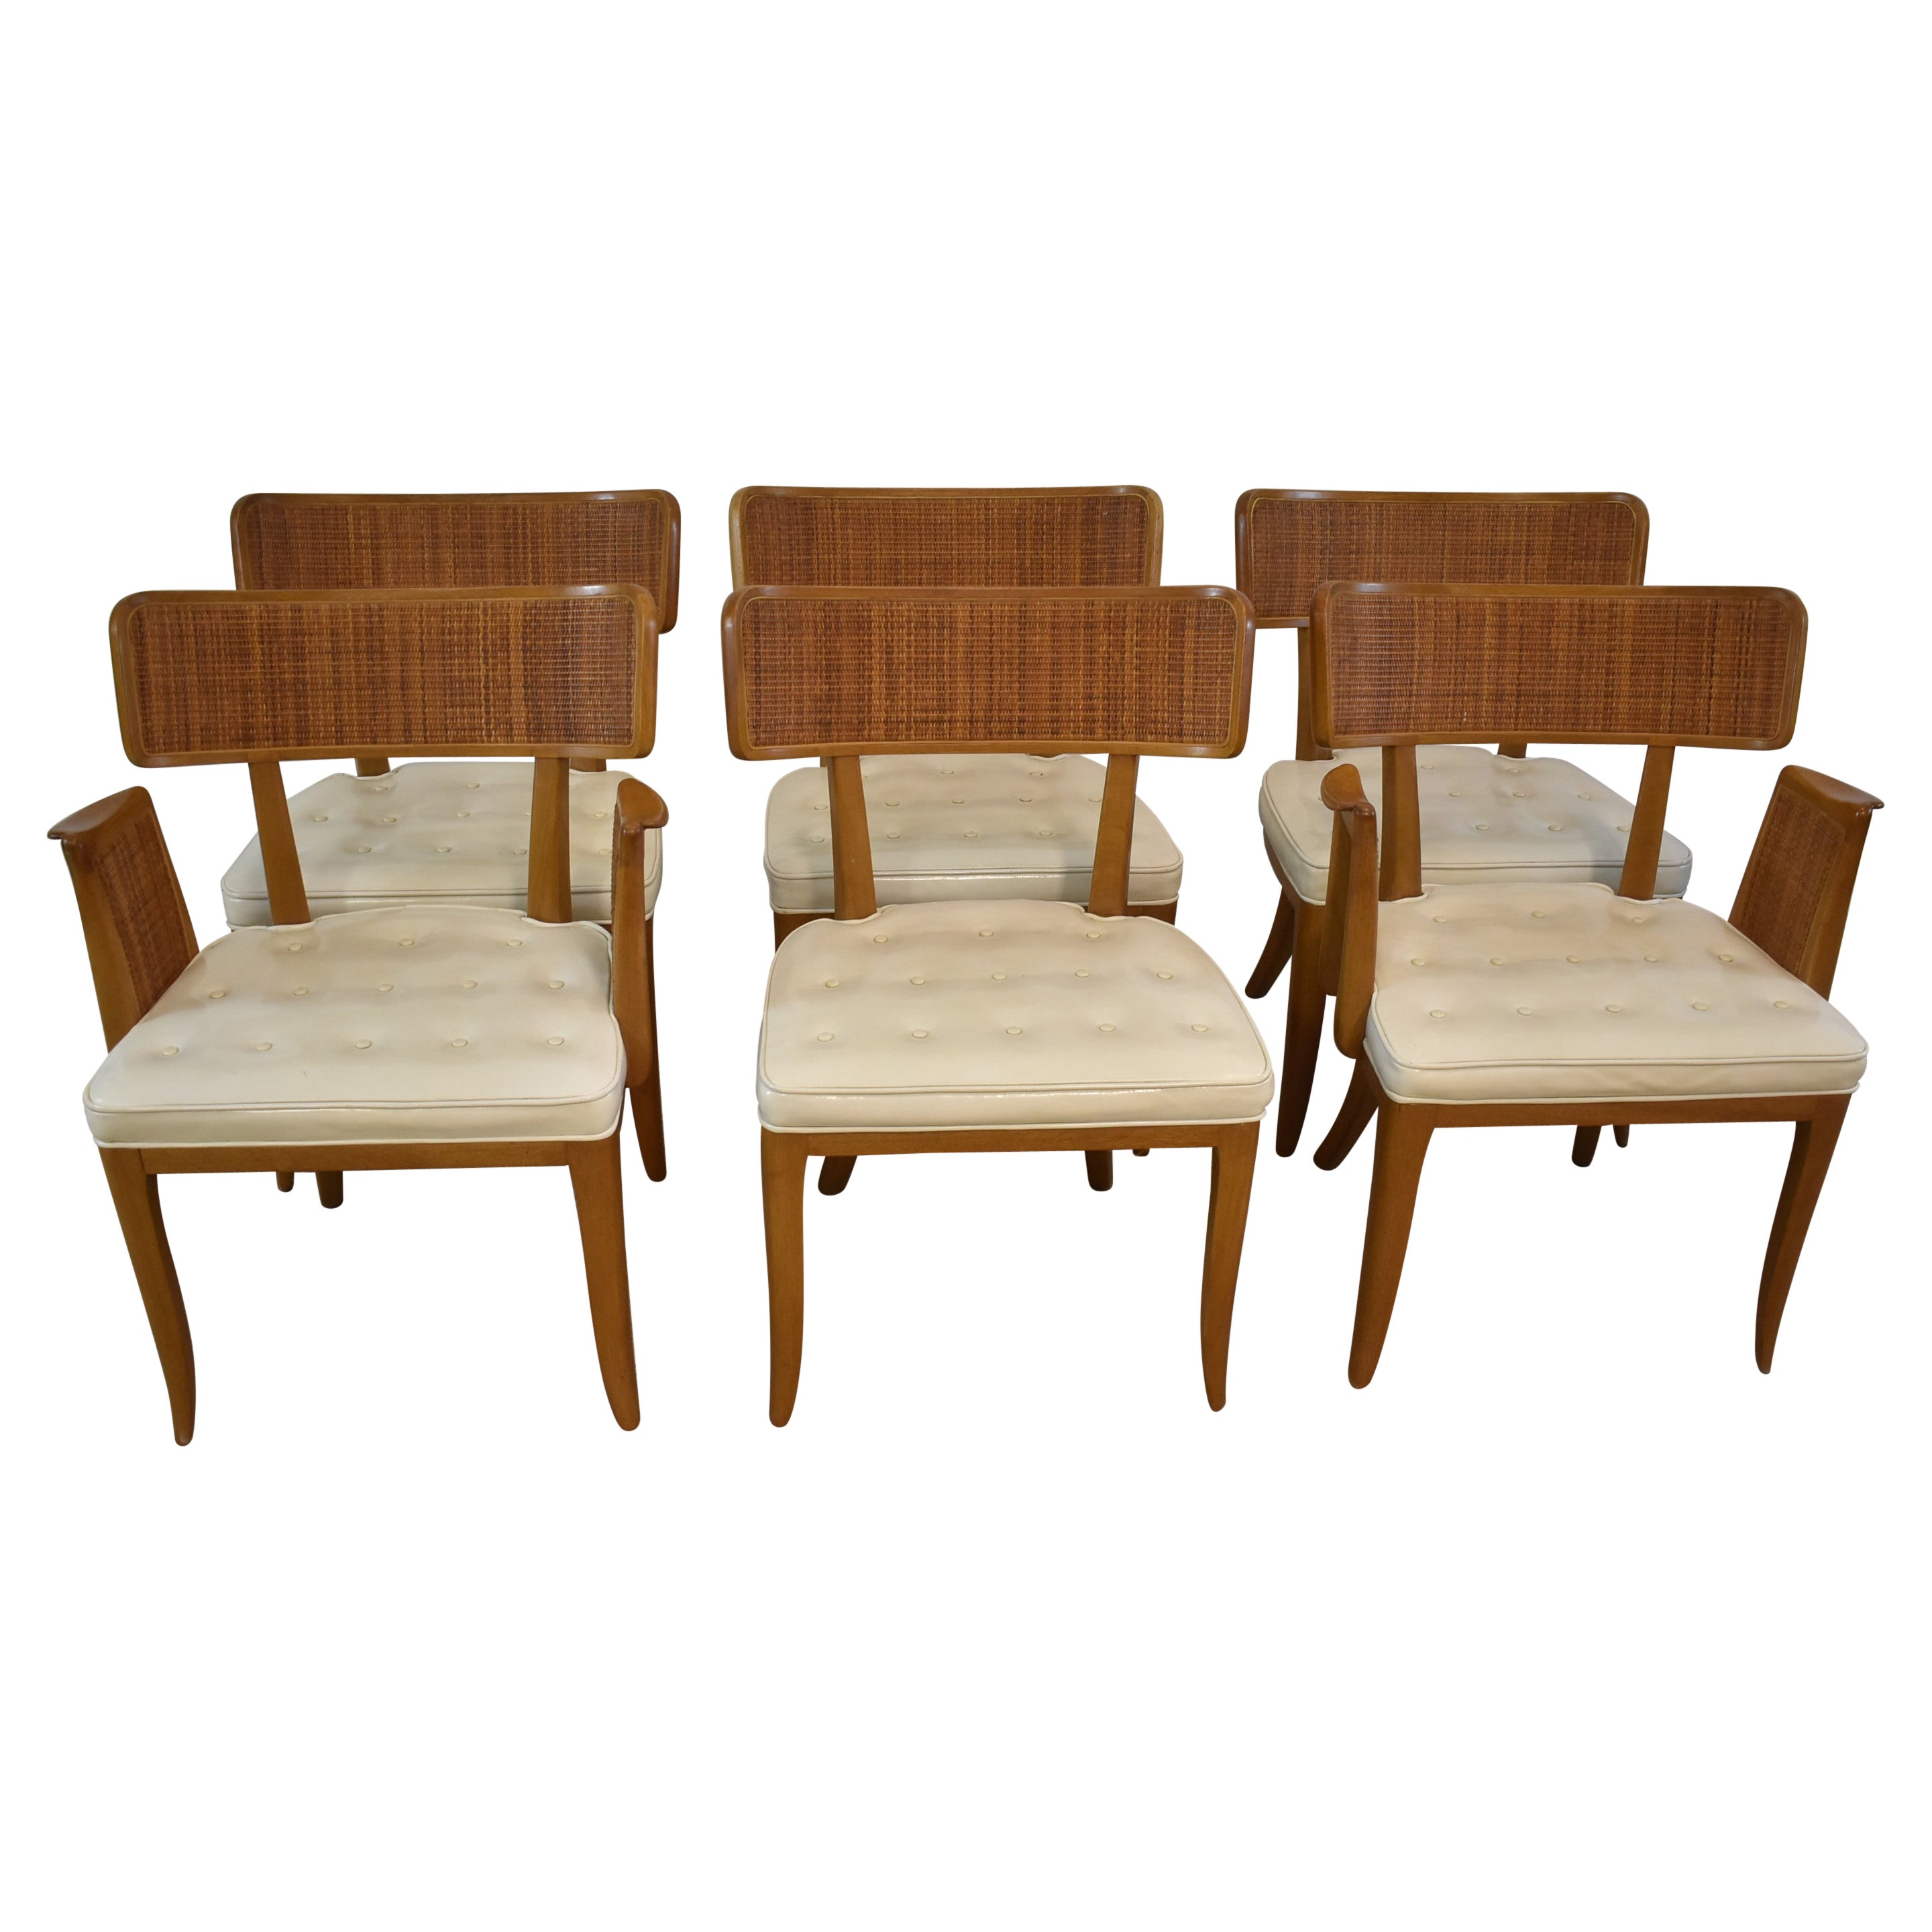 Six Vintage Dunbar Dining Chairs Cane Back Edward Wormley Design, circa 1950's For Sale